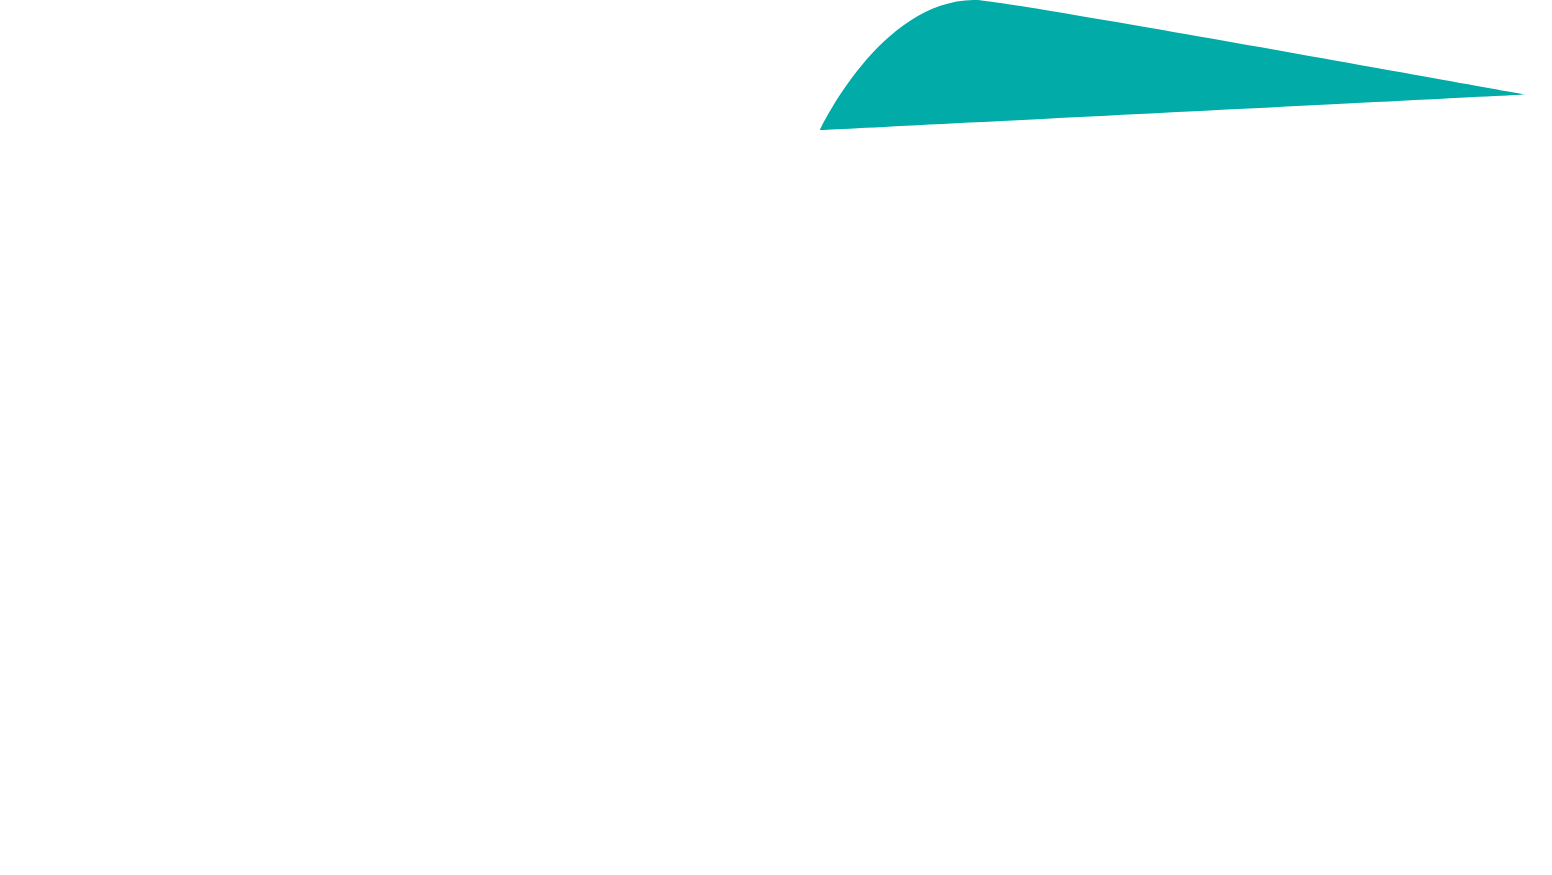 Performance Shipping
 logo large for dark backgrounds (transparent PNG)